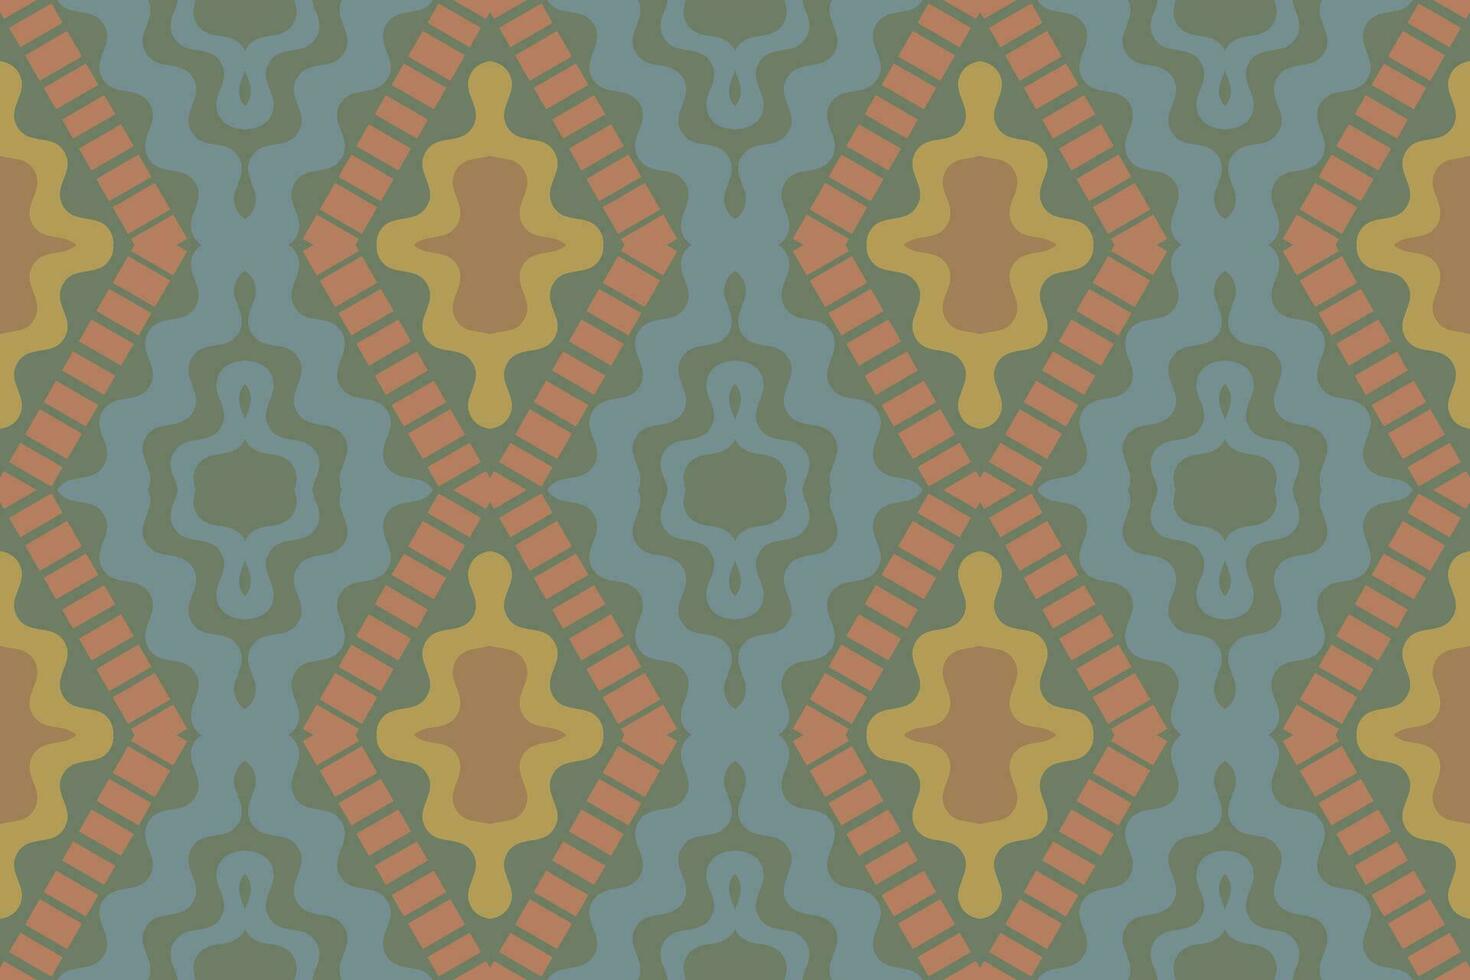 Ikat Damask Paisley Embroidery Background. Ikat Background Geometric Ethnic Oriental Pattern traditional.aztec Style Abstract Vector illustration.designTexture,fabric,clothing,wrapping,sarong.